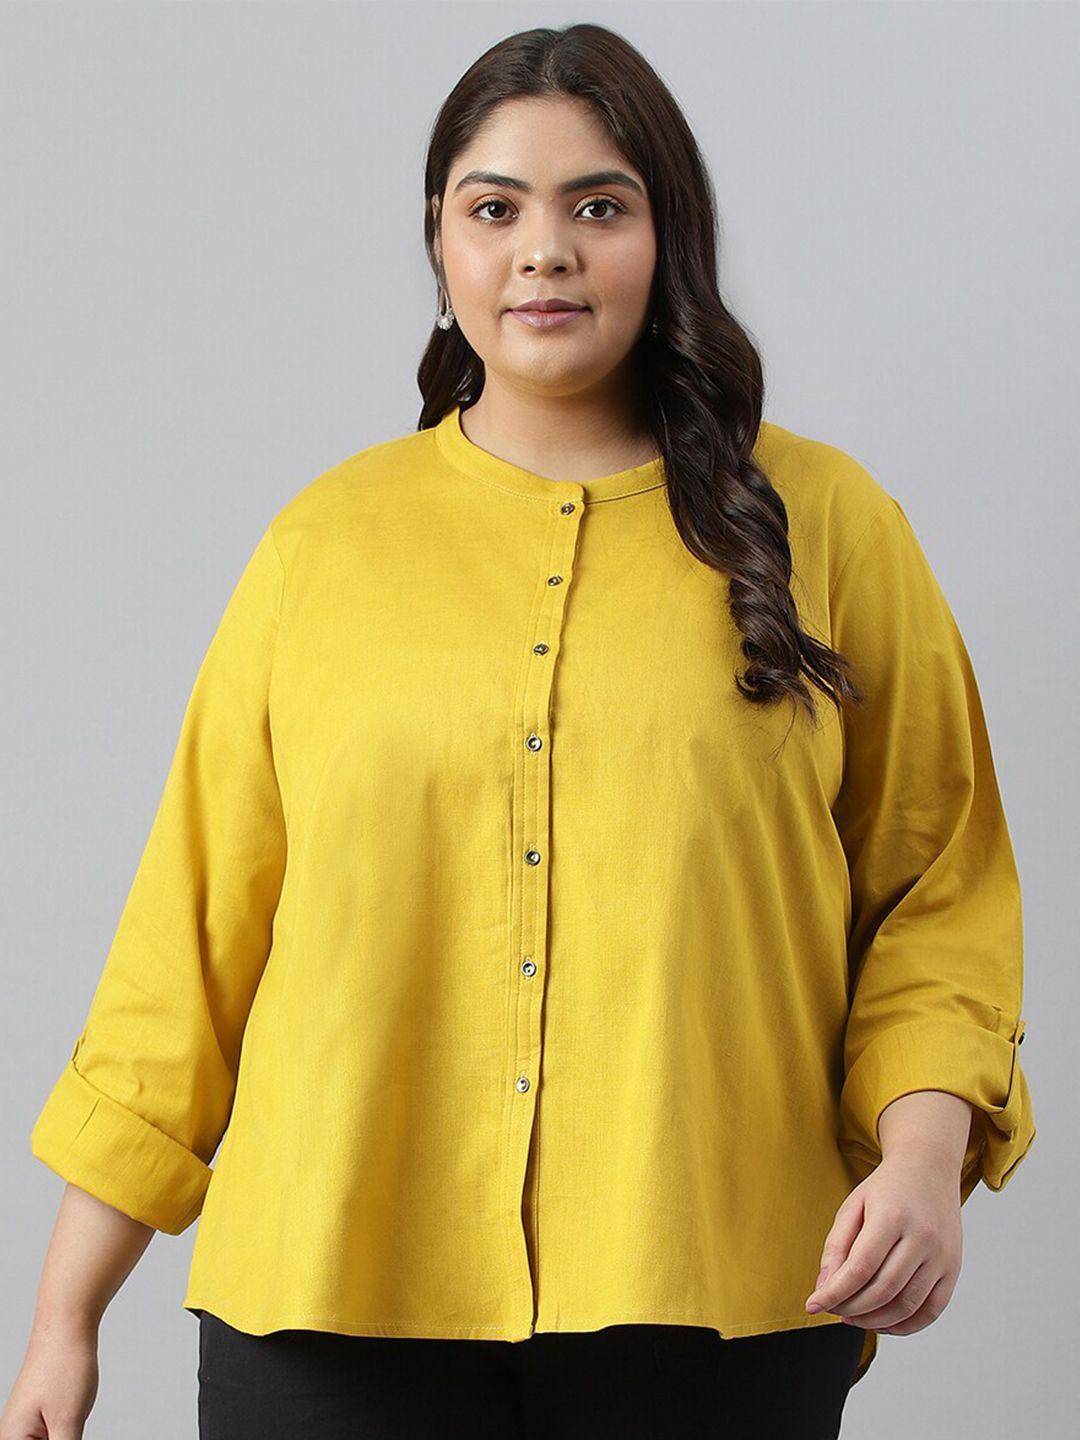 w plus size cotton roll-up sleeves shirt style top